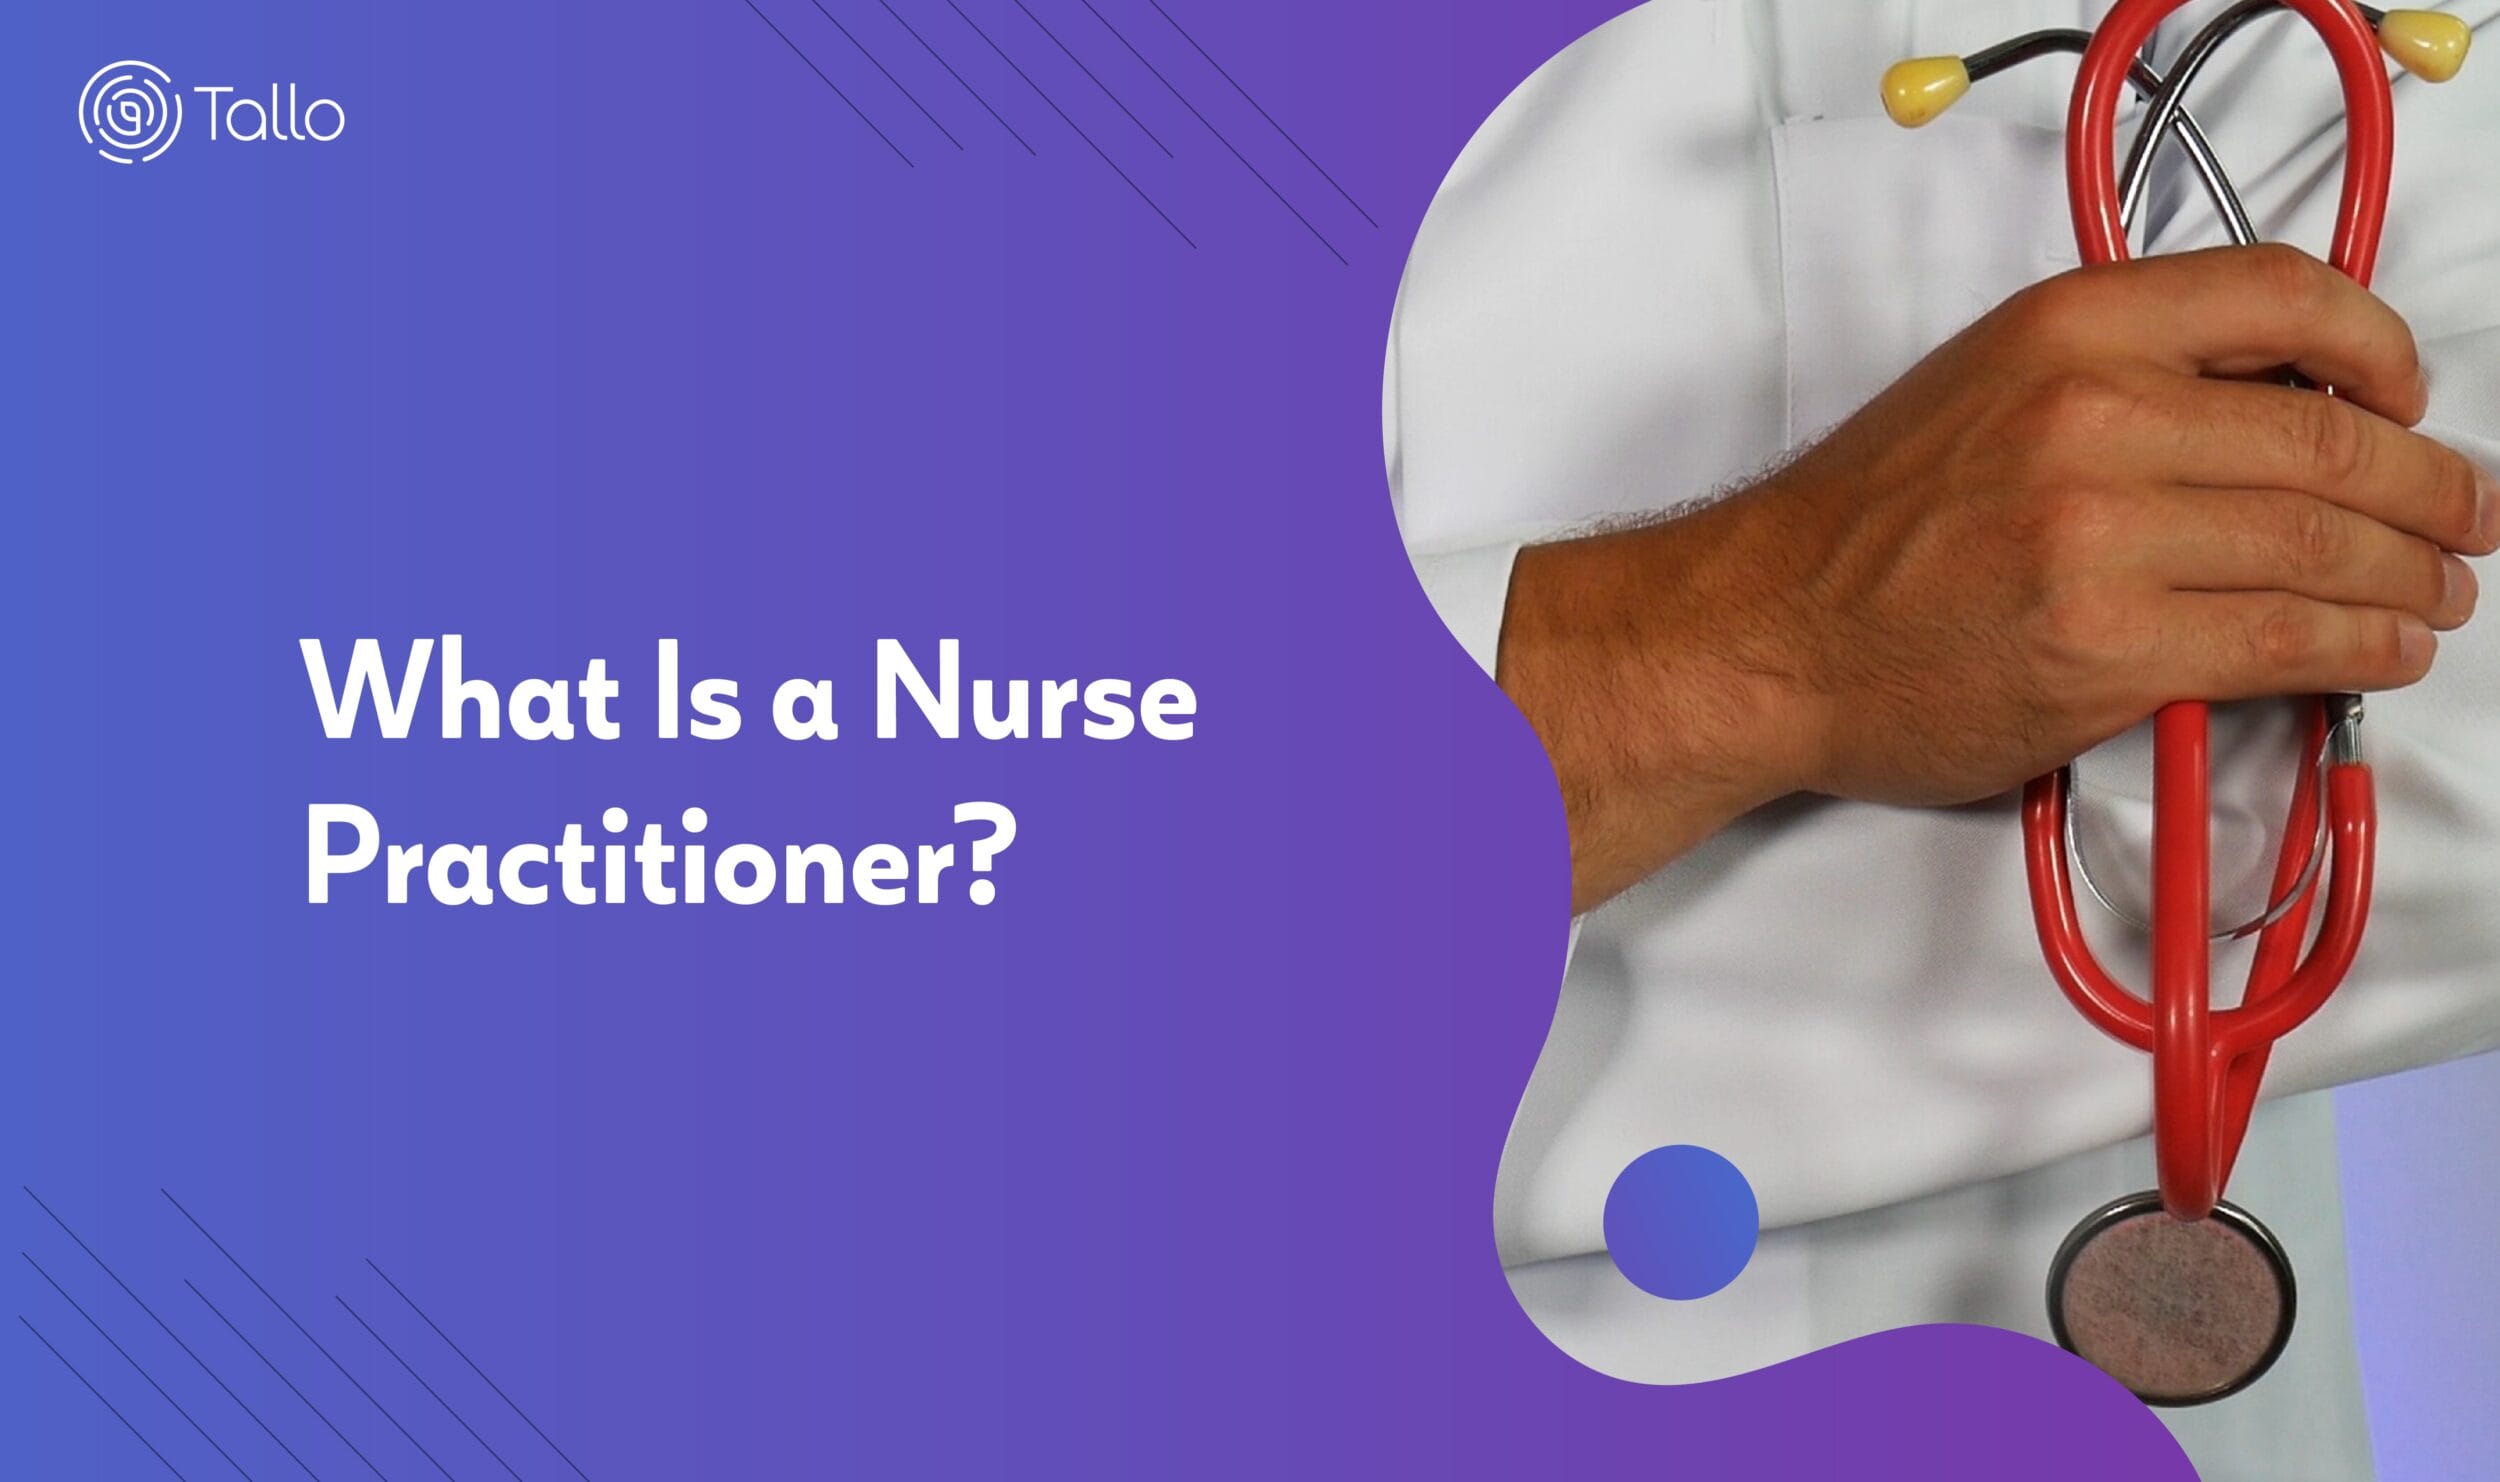 What Is a Nurse Practitioner